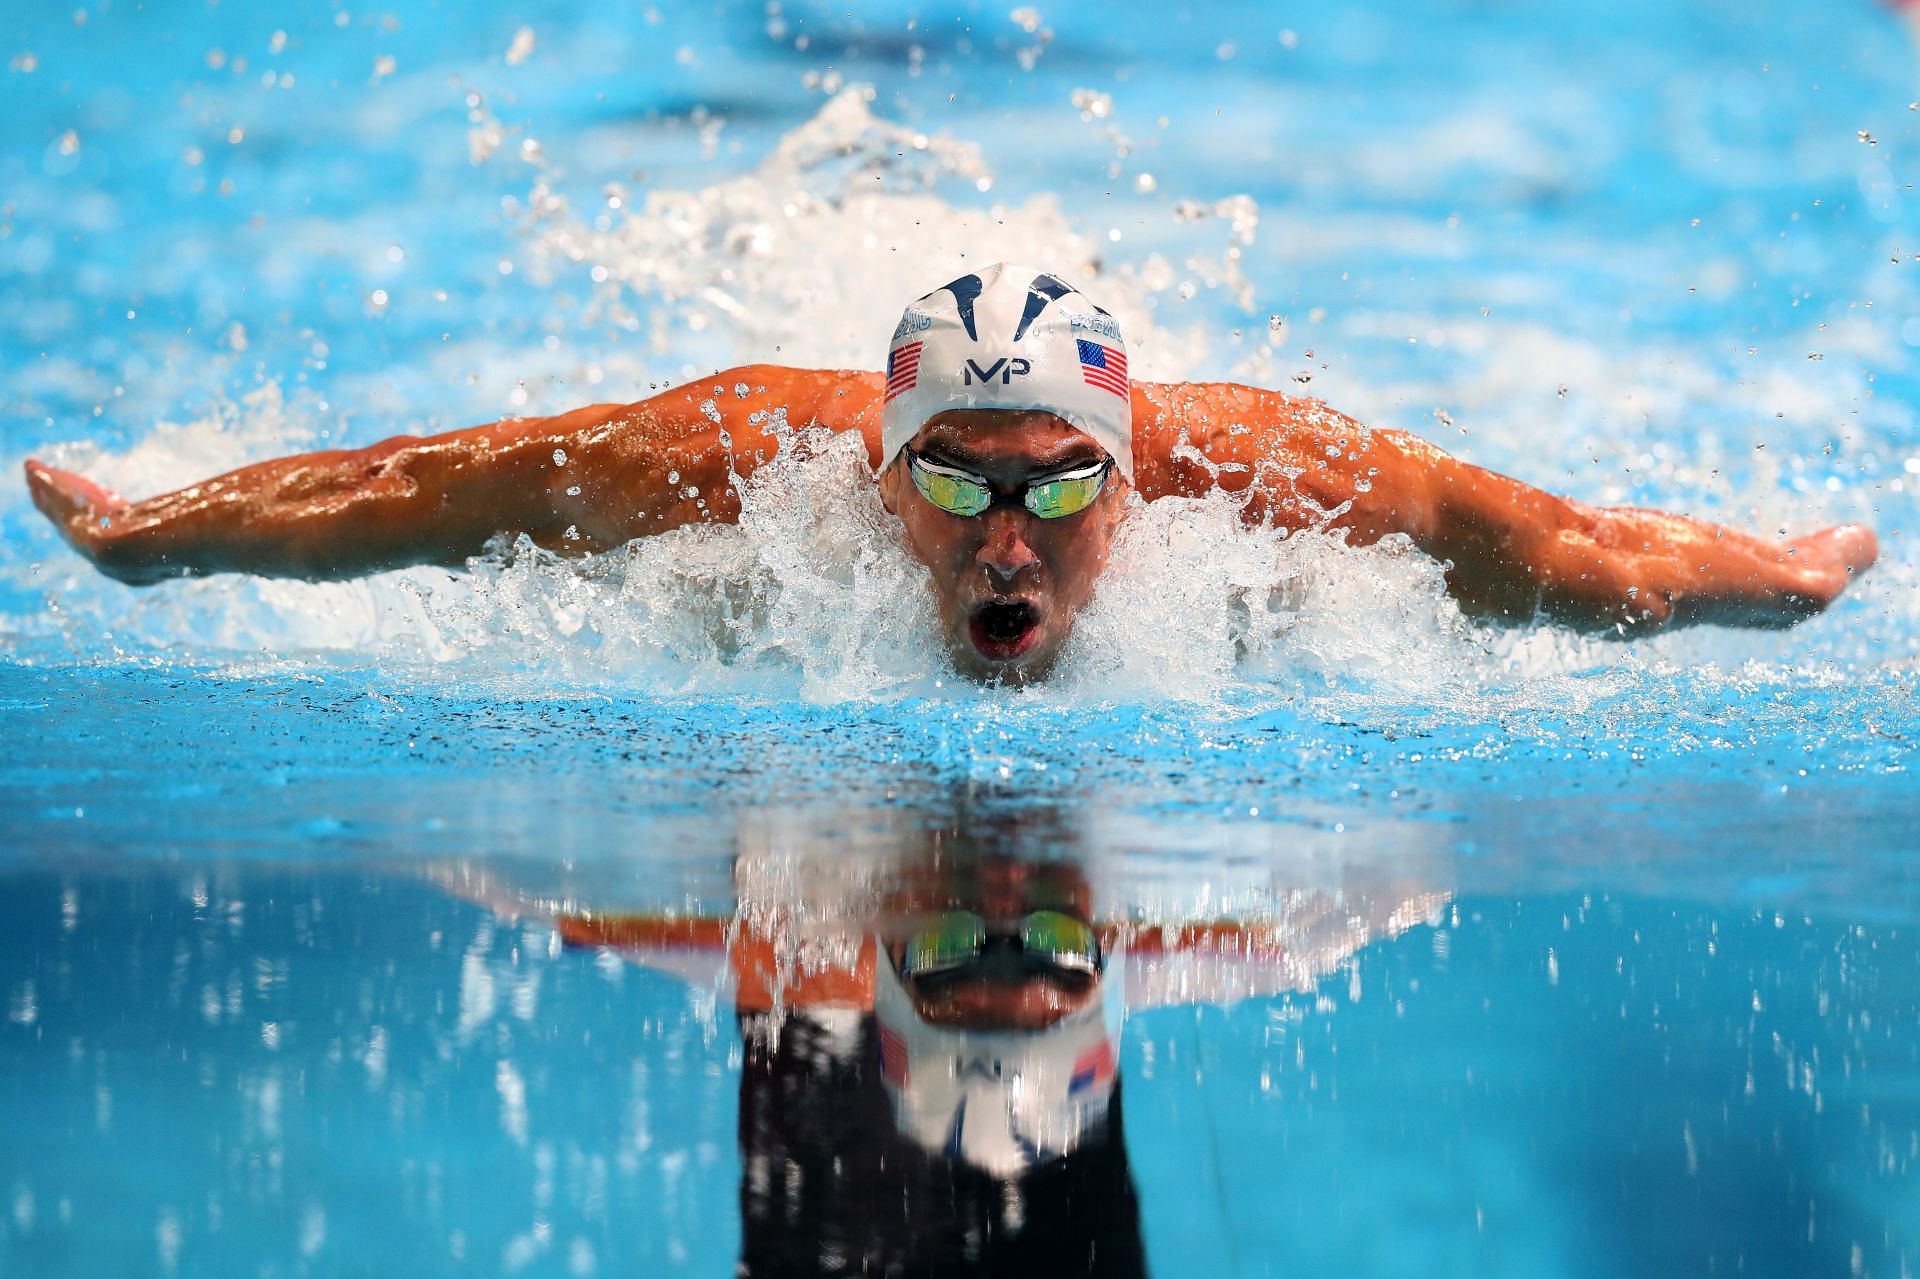 Michael Phelps during the U.S. Olympic Team Swimming Trials in 2016